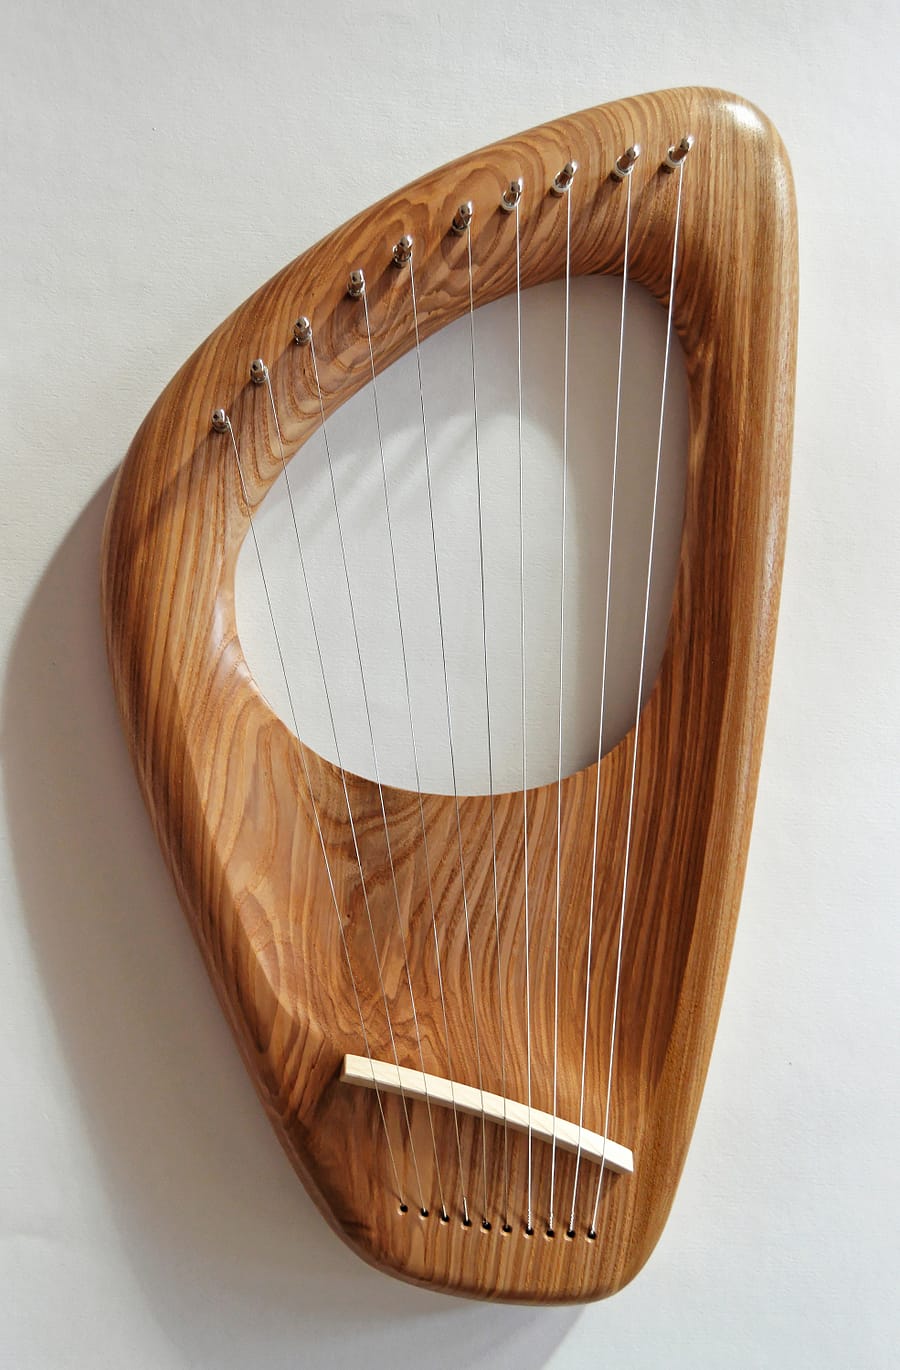 10 String Pentatonic Lyre, Ash Wood, Hand crafted